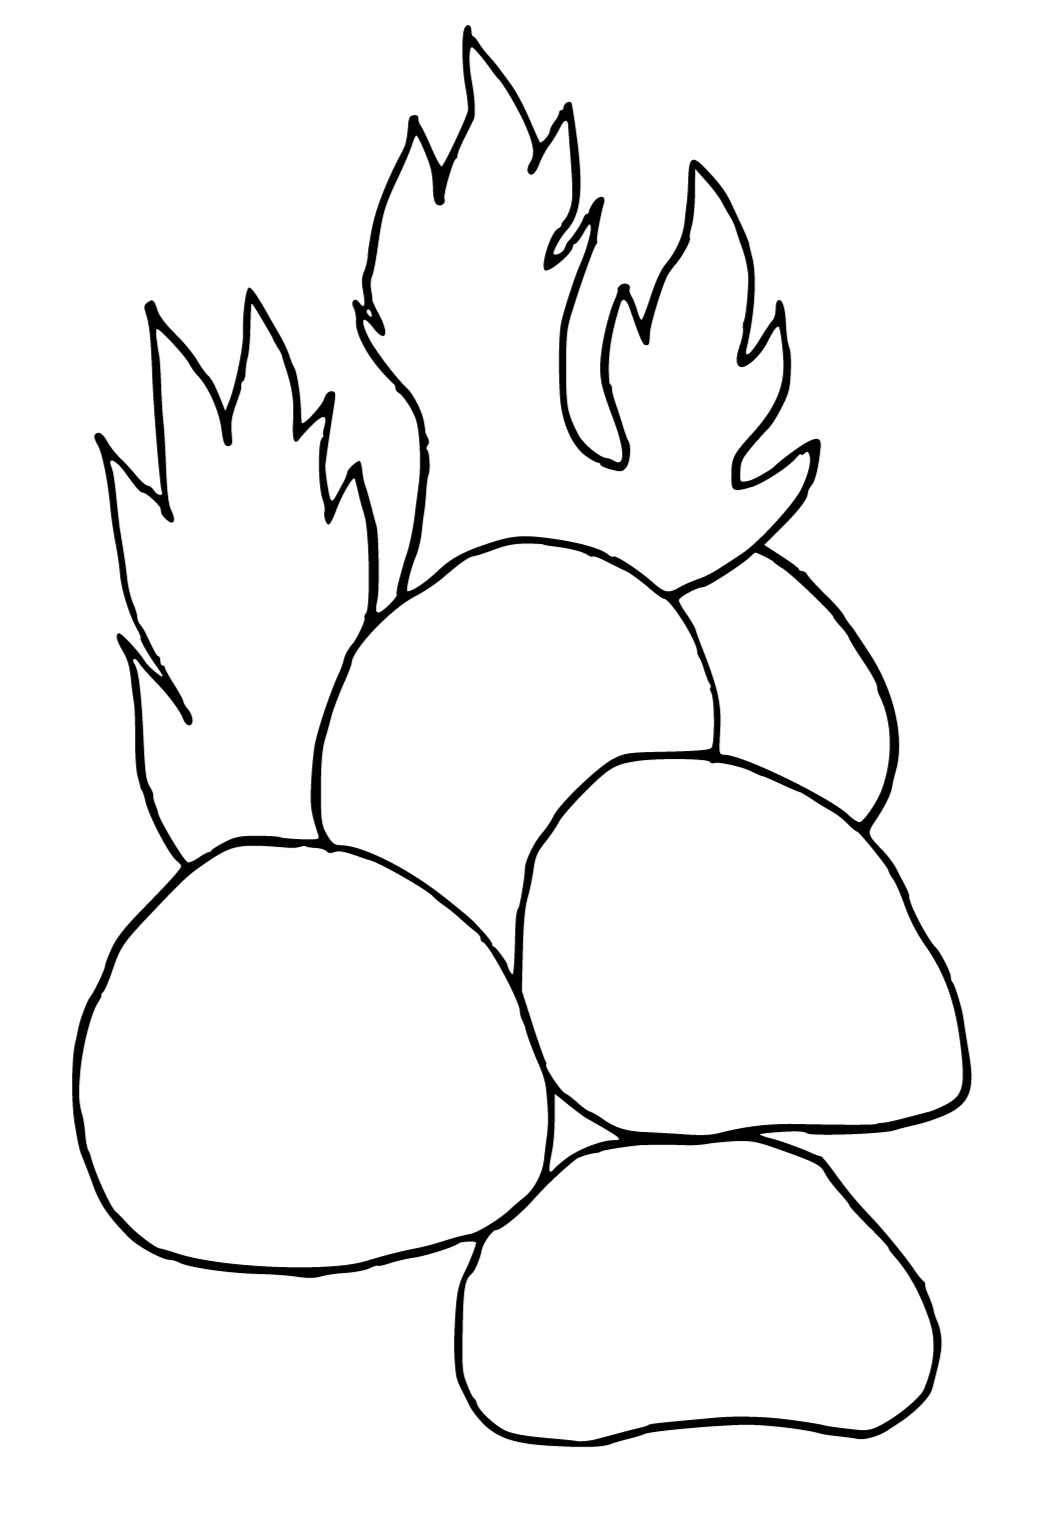 Free printable rock plant coloring page for adults and kids